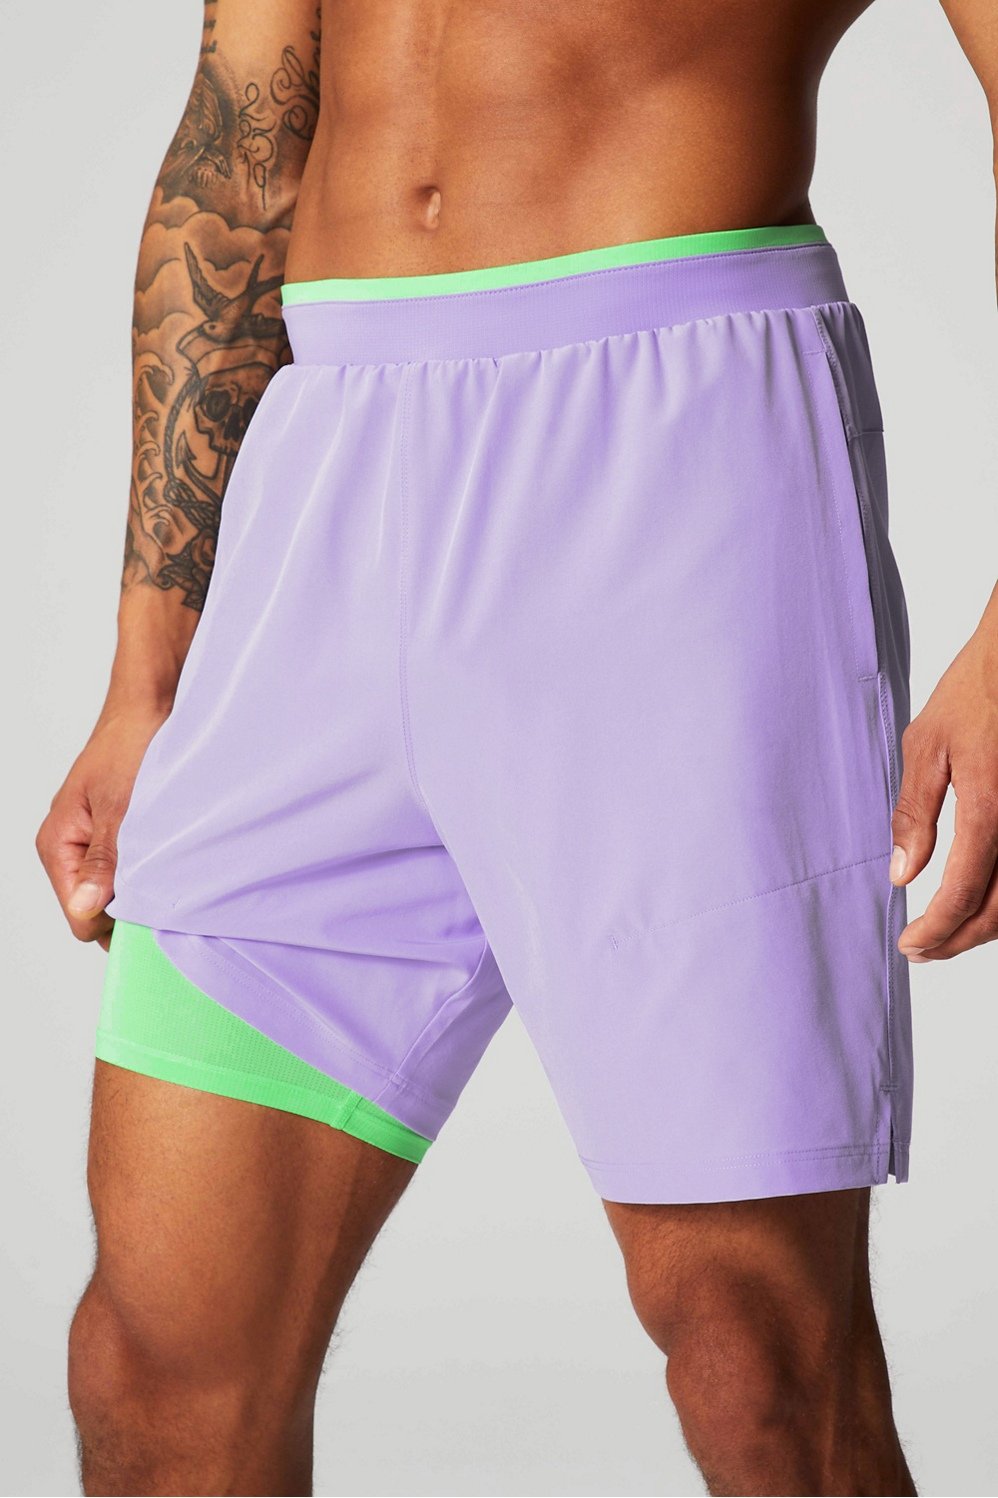 Fabletics elesia shorts workout shorts gym shorts athletic shorts size  medium​ - $28 New With Tags - From Paydin